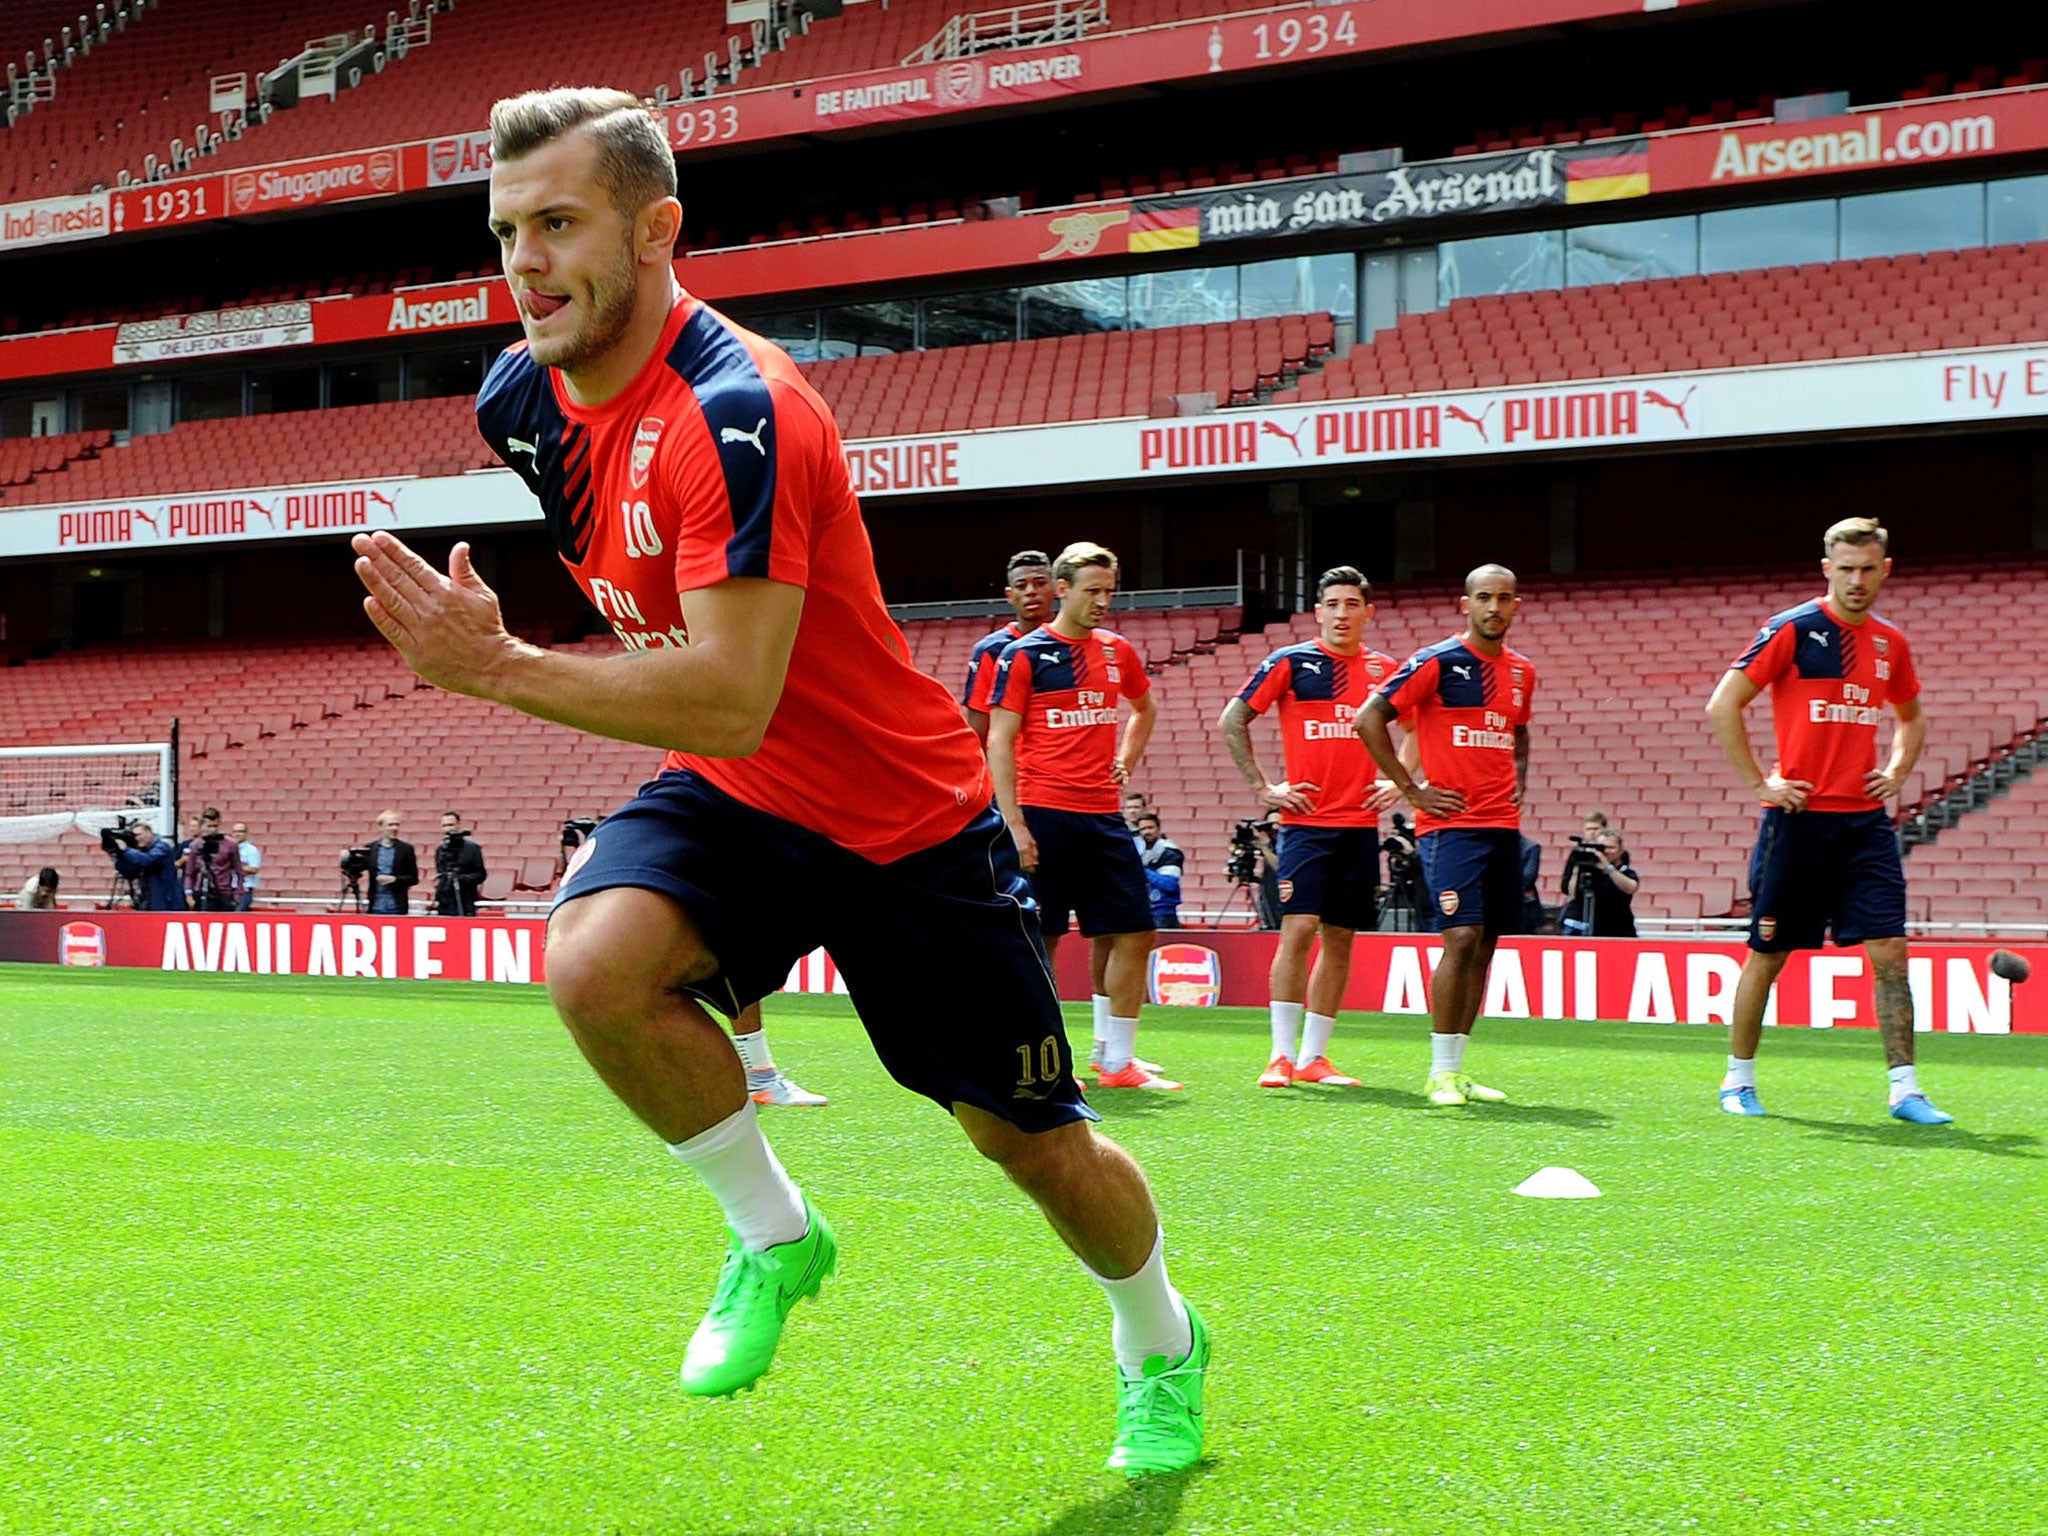 Jack Wilshere has an ankle injury